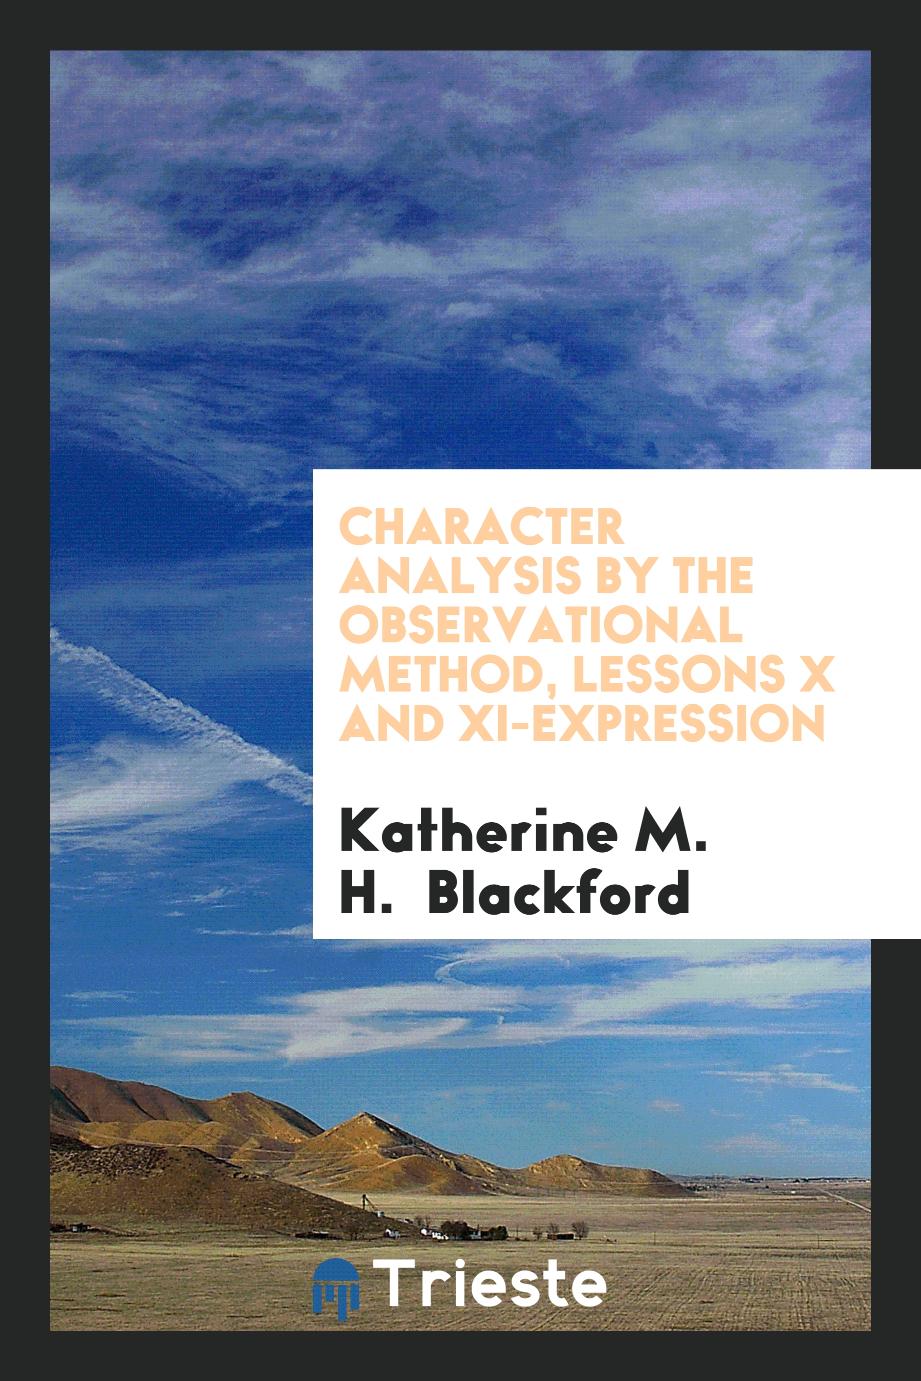 Character analysis by the observational method, Lessons X and XI-Expression